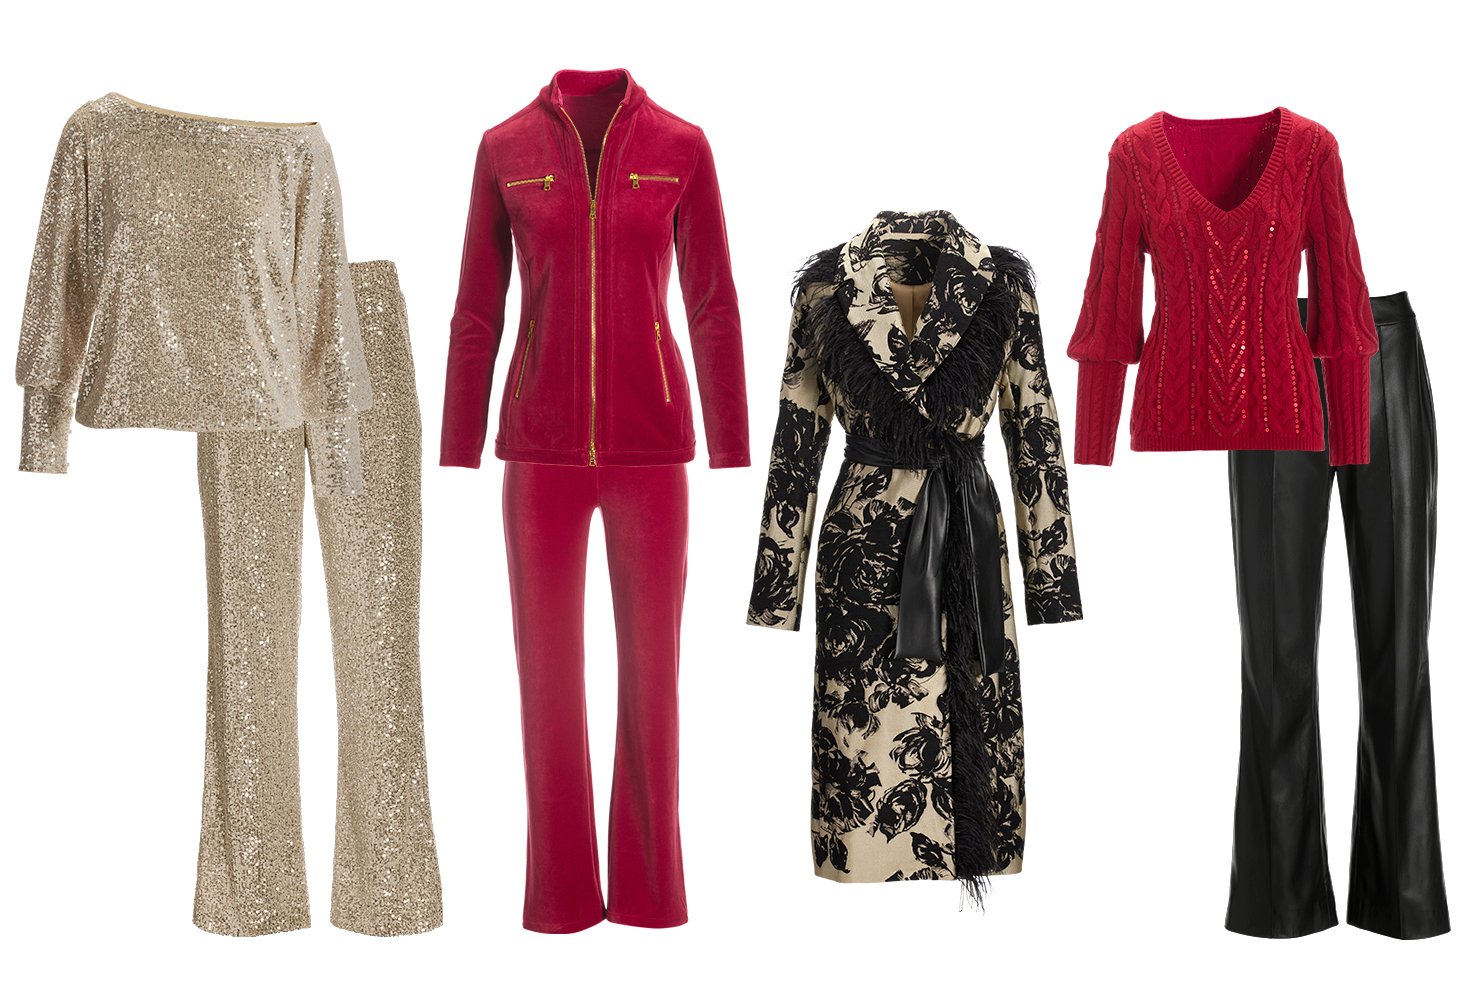 from left to right: gold sequin slouchy long-sleeve top and gold sequin palazzo pants. red two-piece jacket and pant set. multicolor faux-feather belted coat. red sequin cable-knit sweater and black faux-leather trousers.